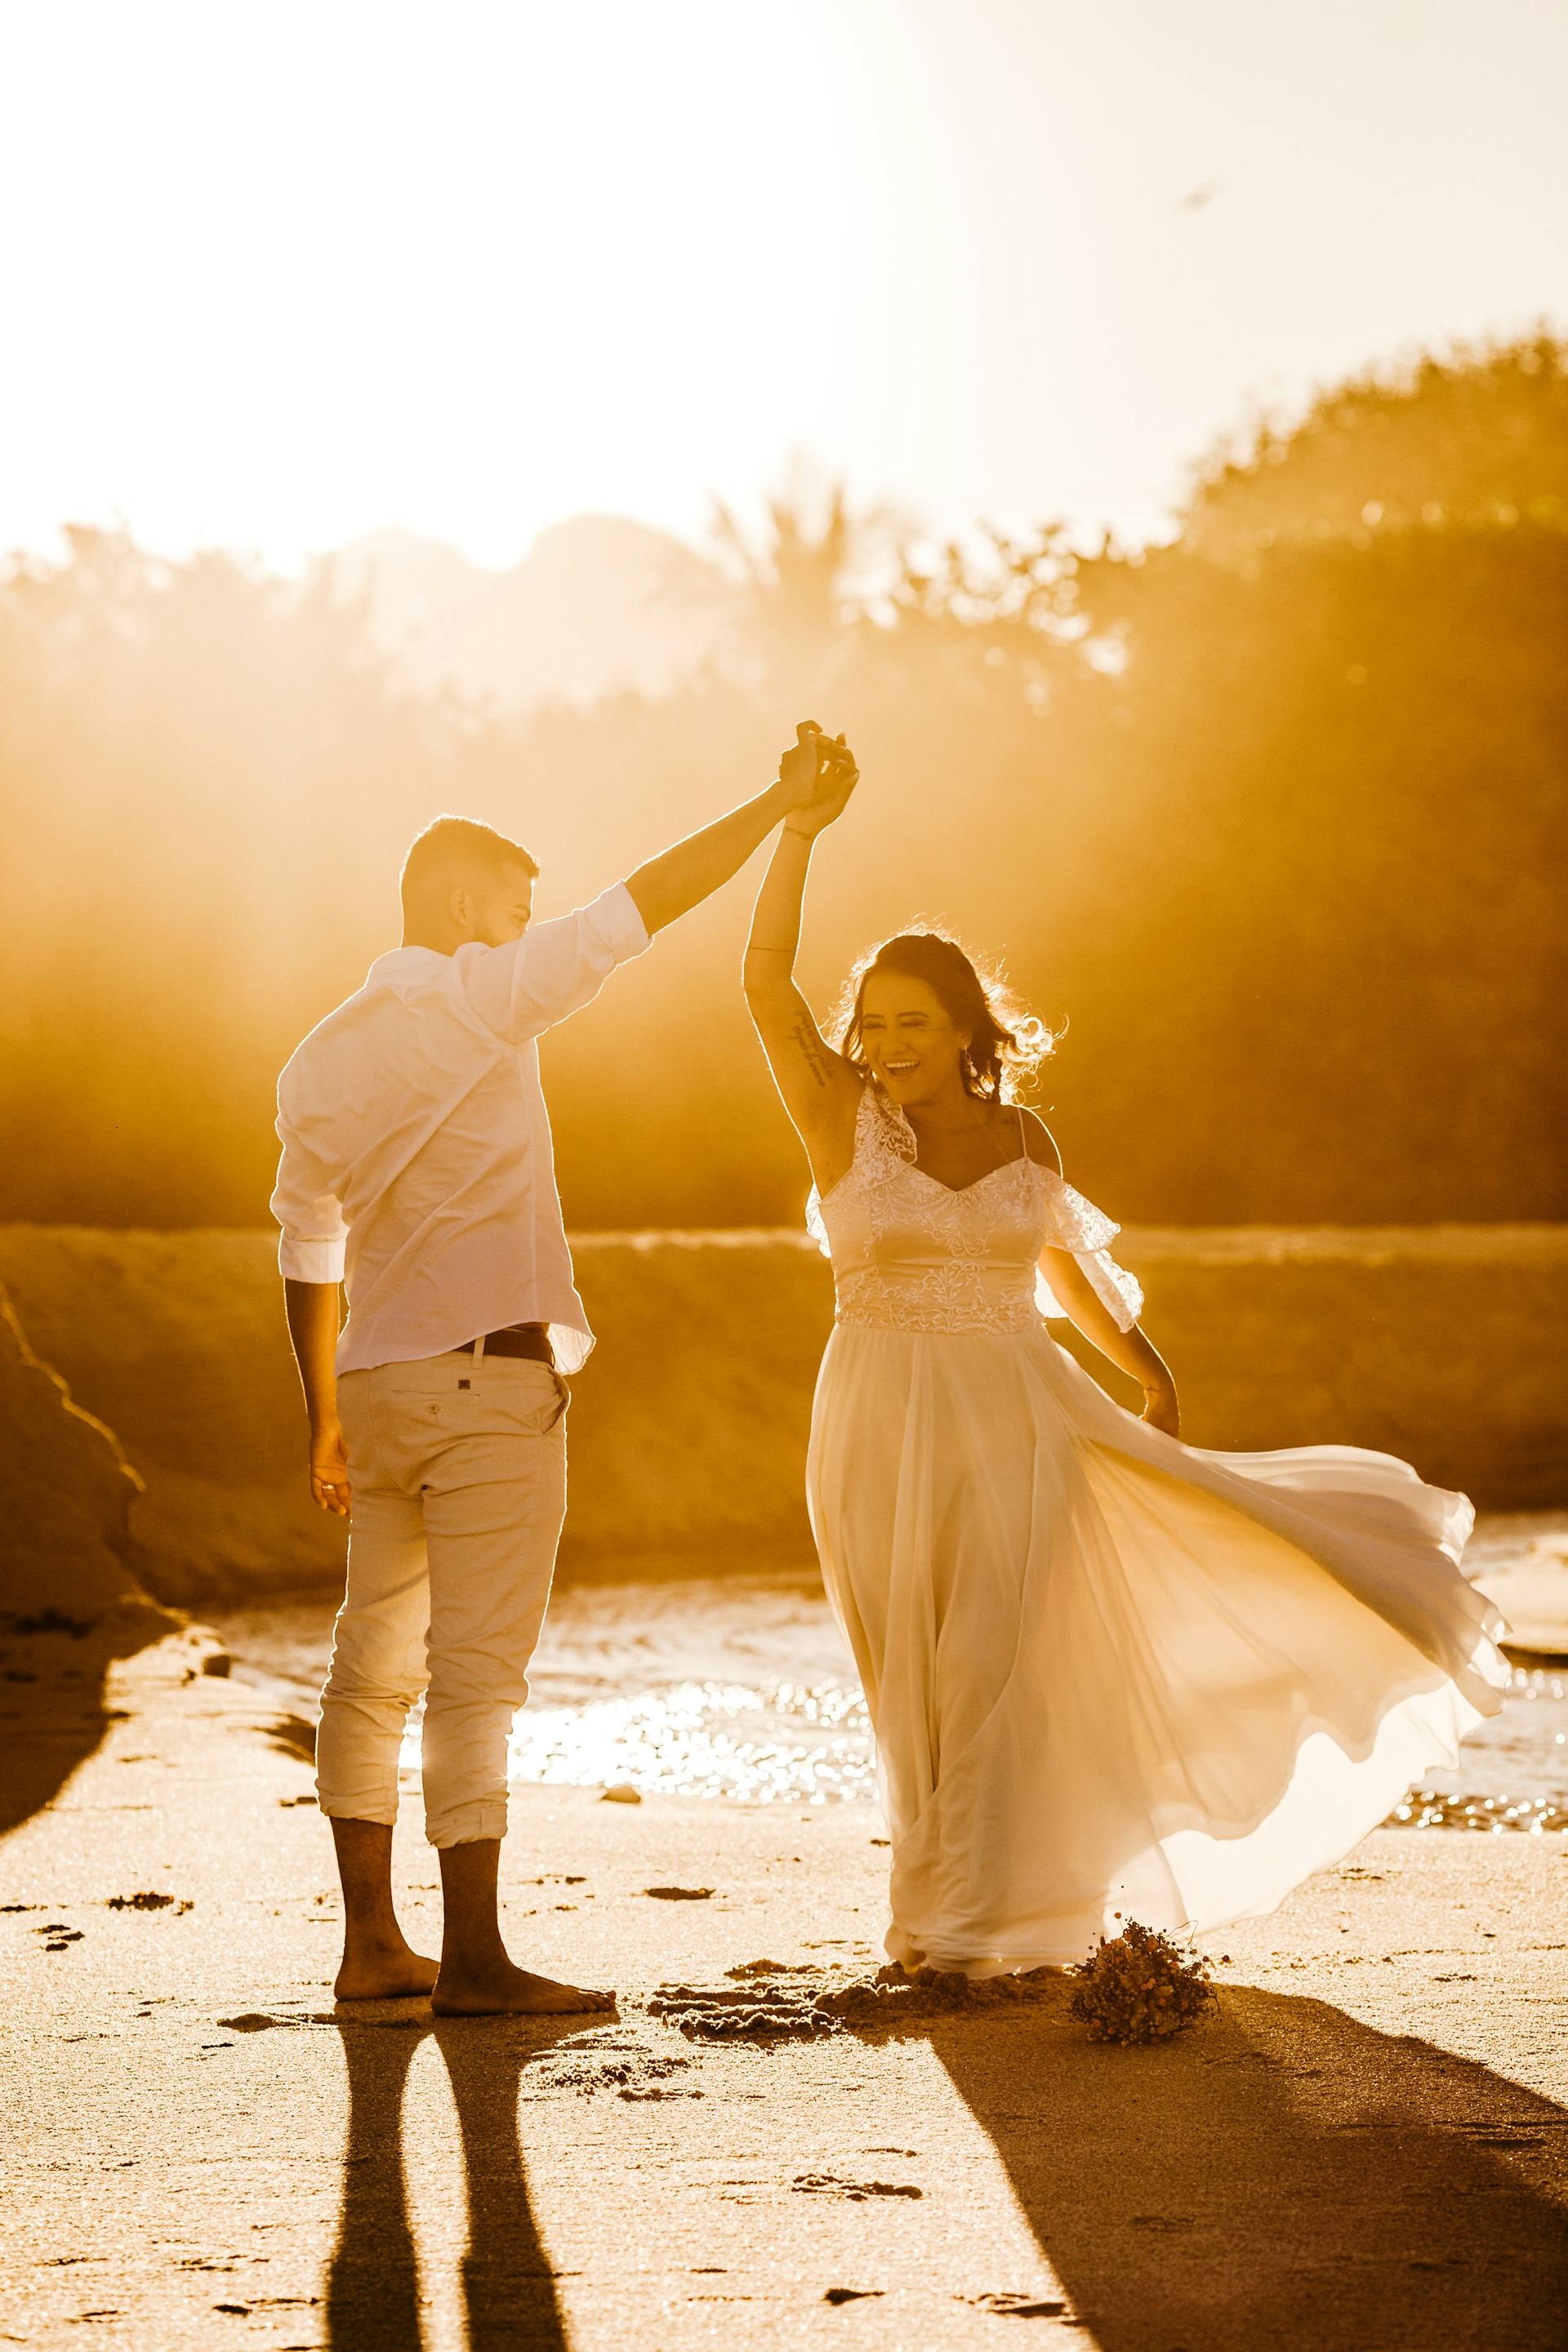 A newlywed couple at the beach | Source: Pexels